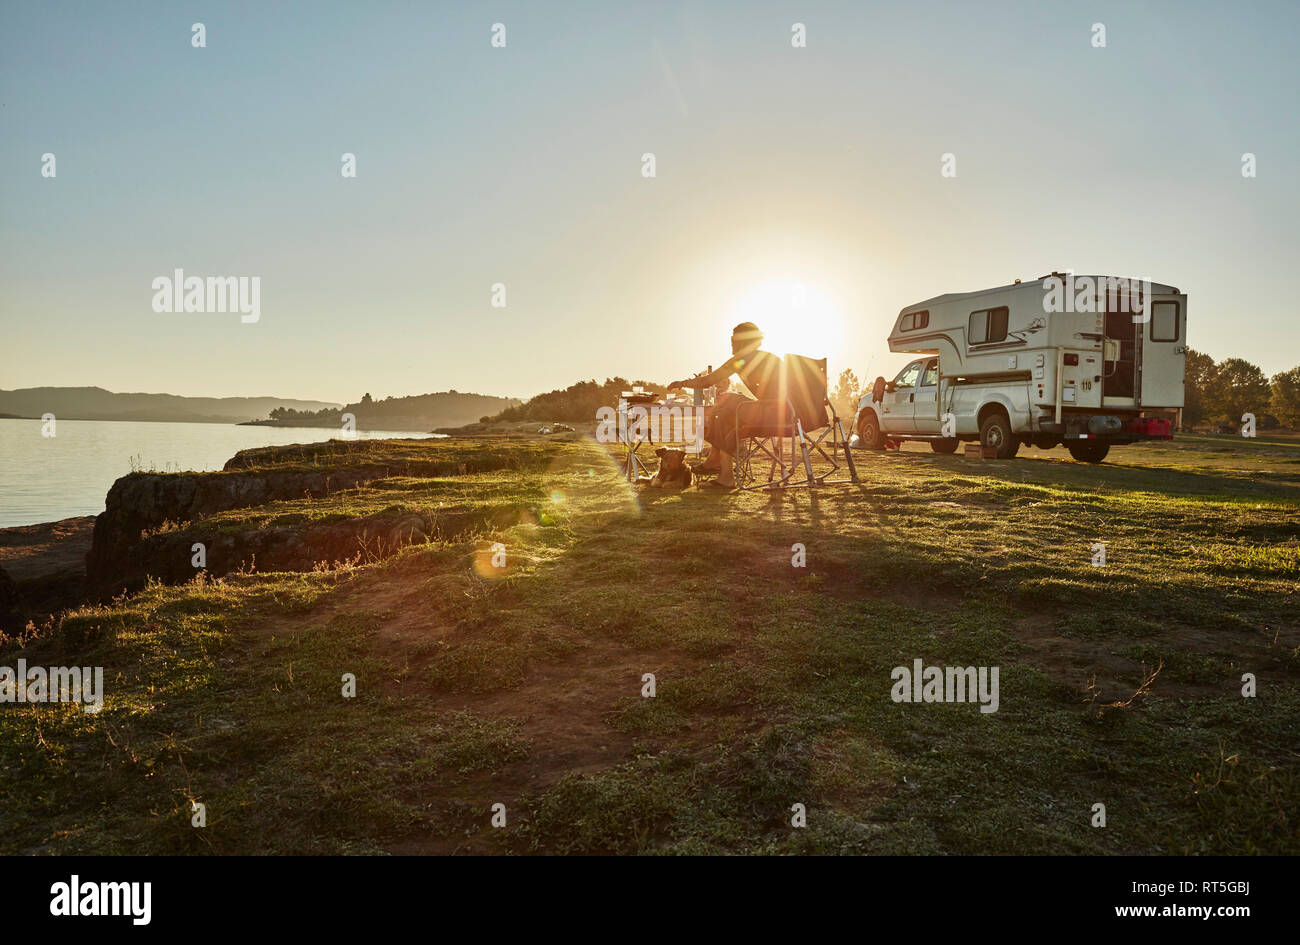 Chile, Talca, Rio Maule, camper at lake with woman and dog at sunset Stock Photo